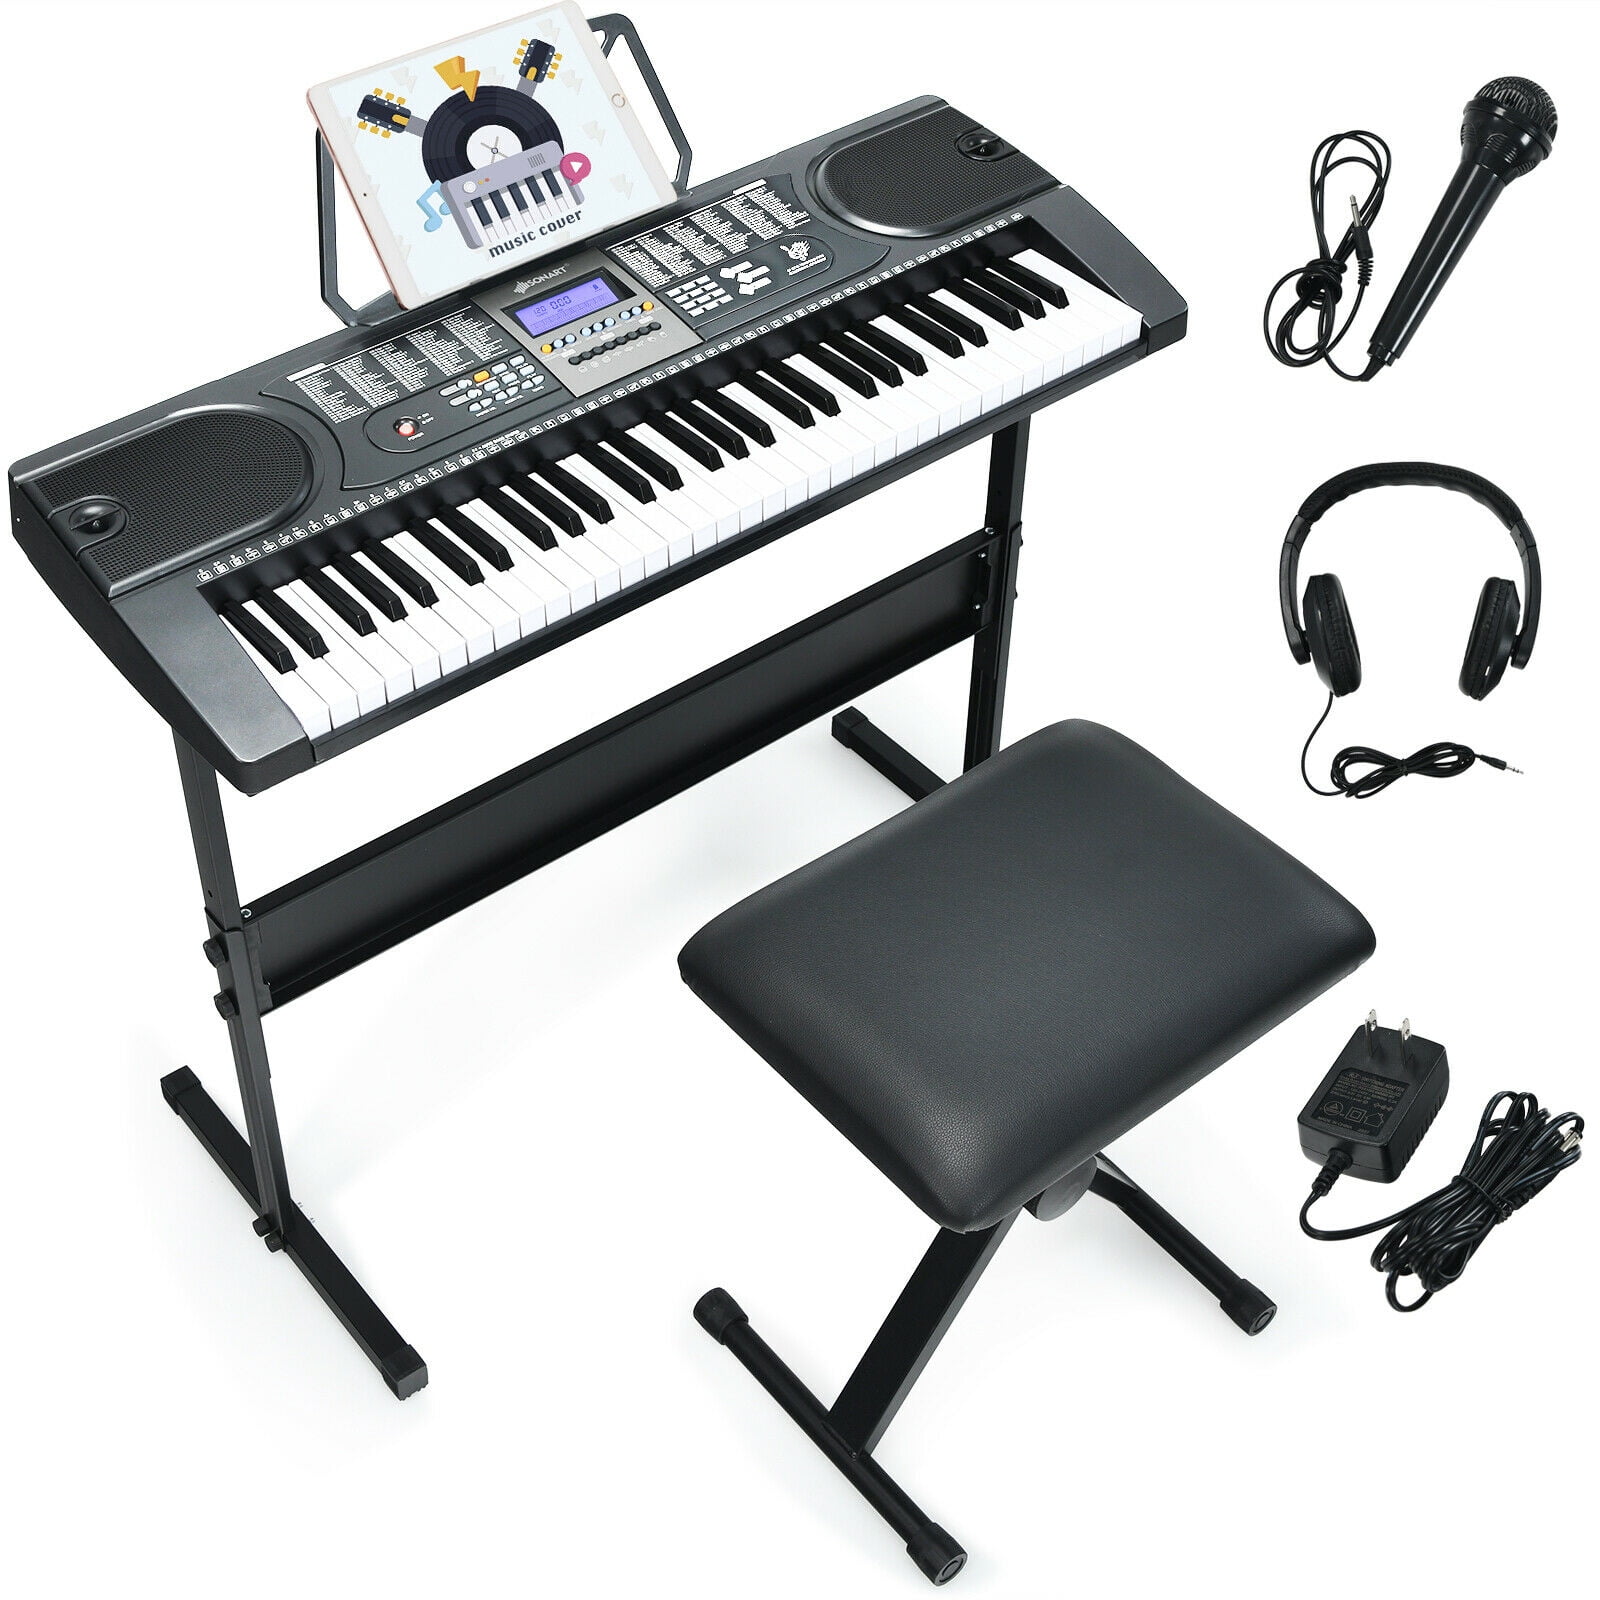 Super Home-Keyboard with 61 keys in the Great Saving Set with Stand and Headphones 